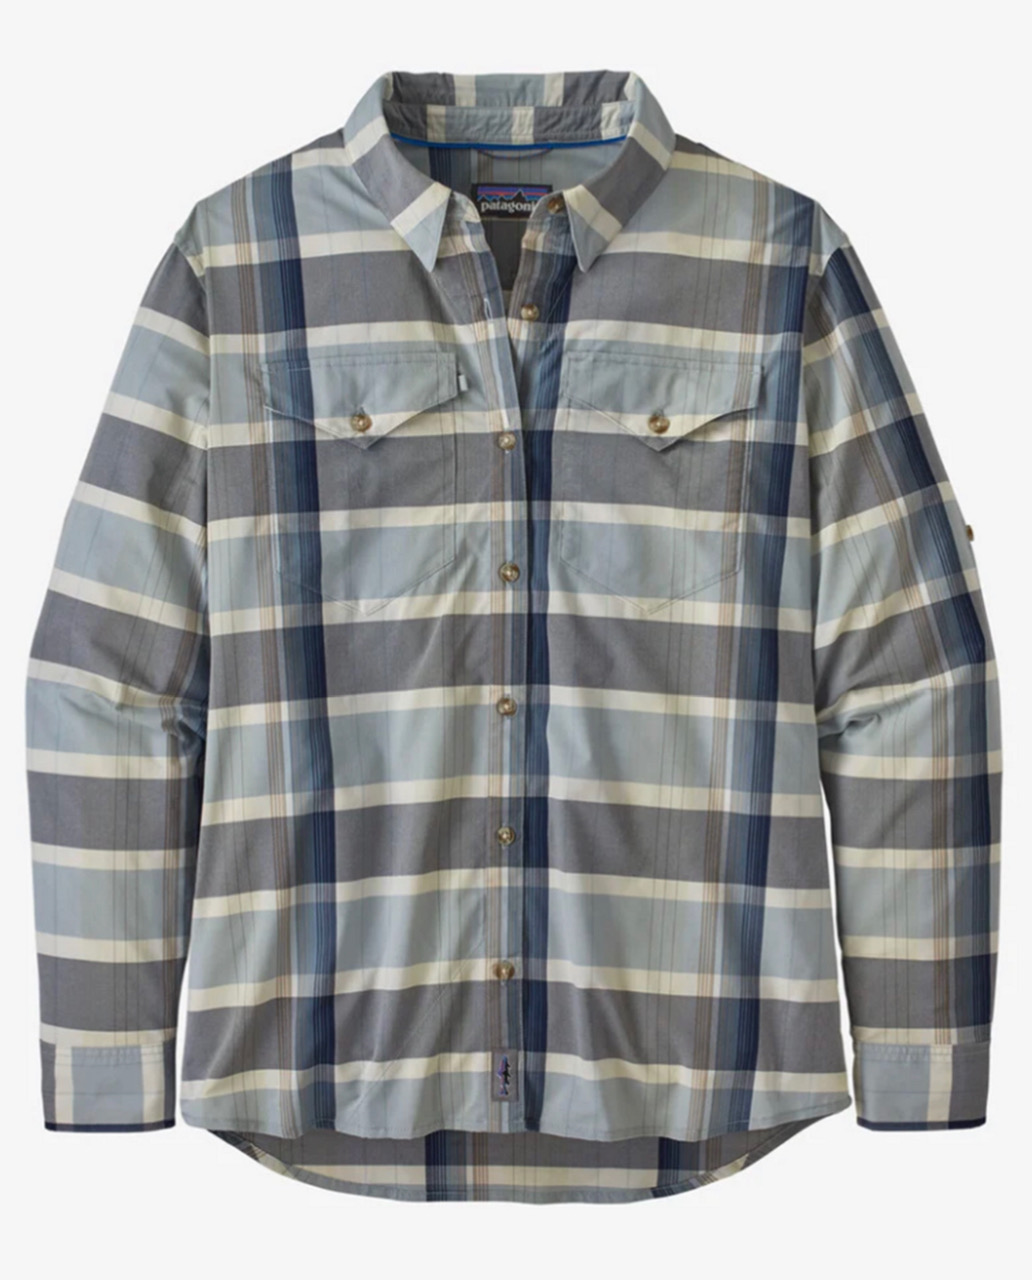 Patagonia W's L/S Sun Stretch Shirt - Cotton Seed: Berlin Blue - Large